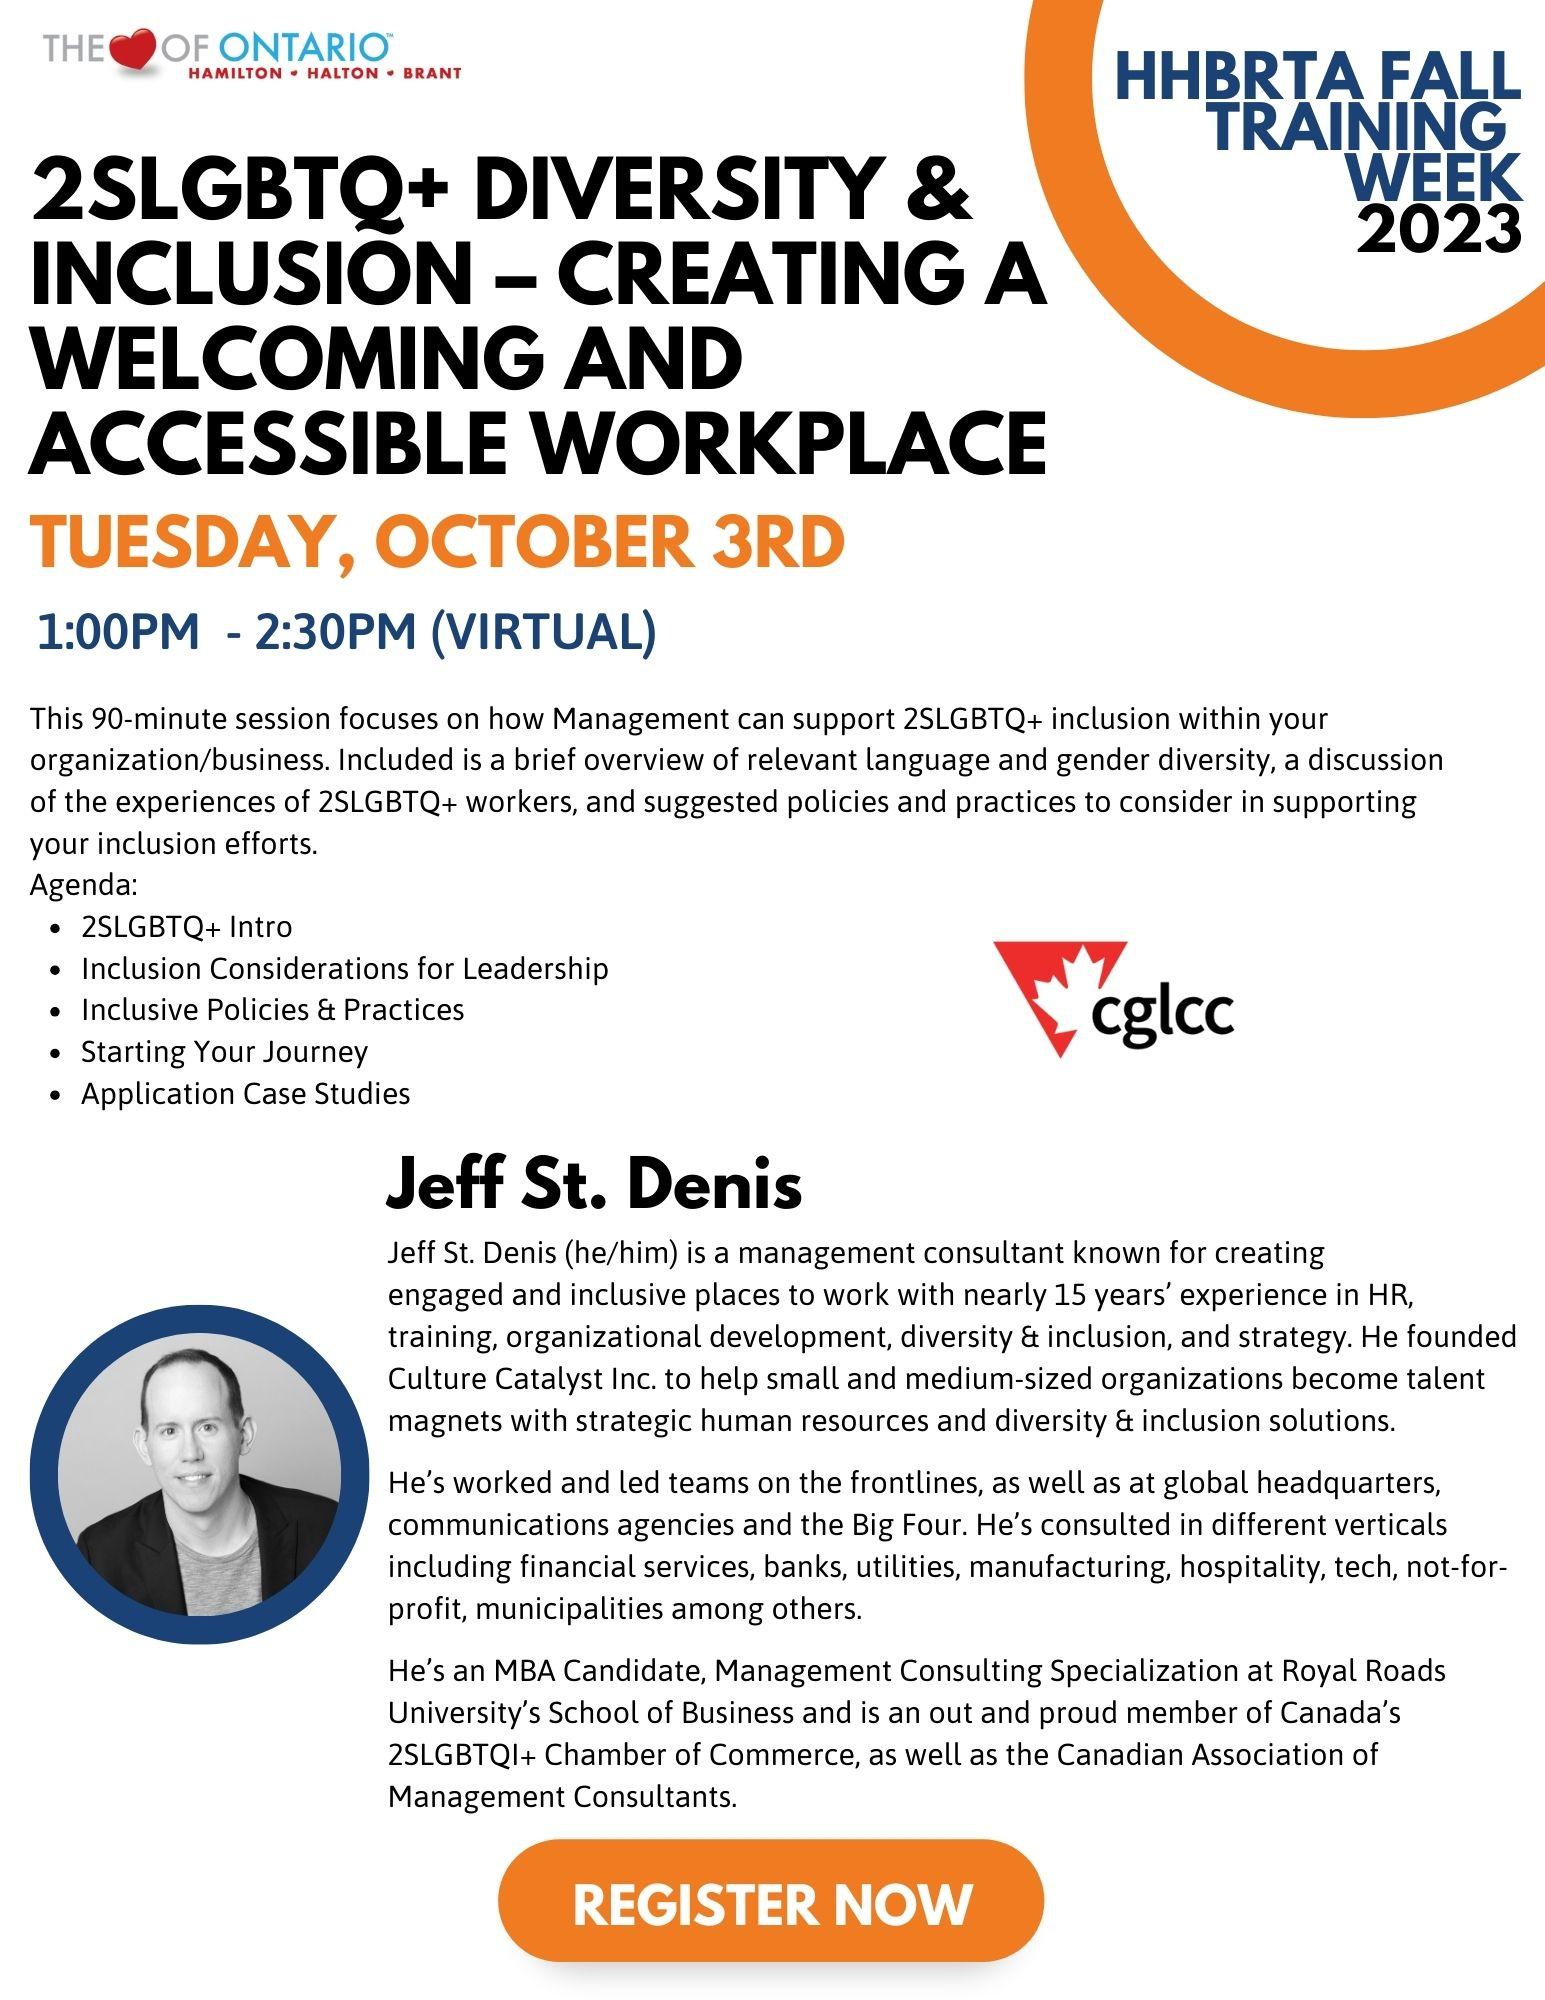 2SLGBTQ+ Diversity & Inclusion – Creating a Welcoming and Accessible Workplace: Training Booklet